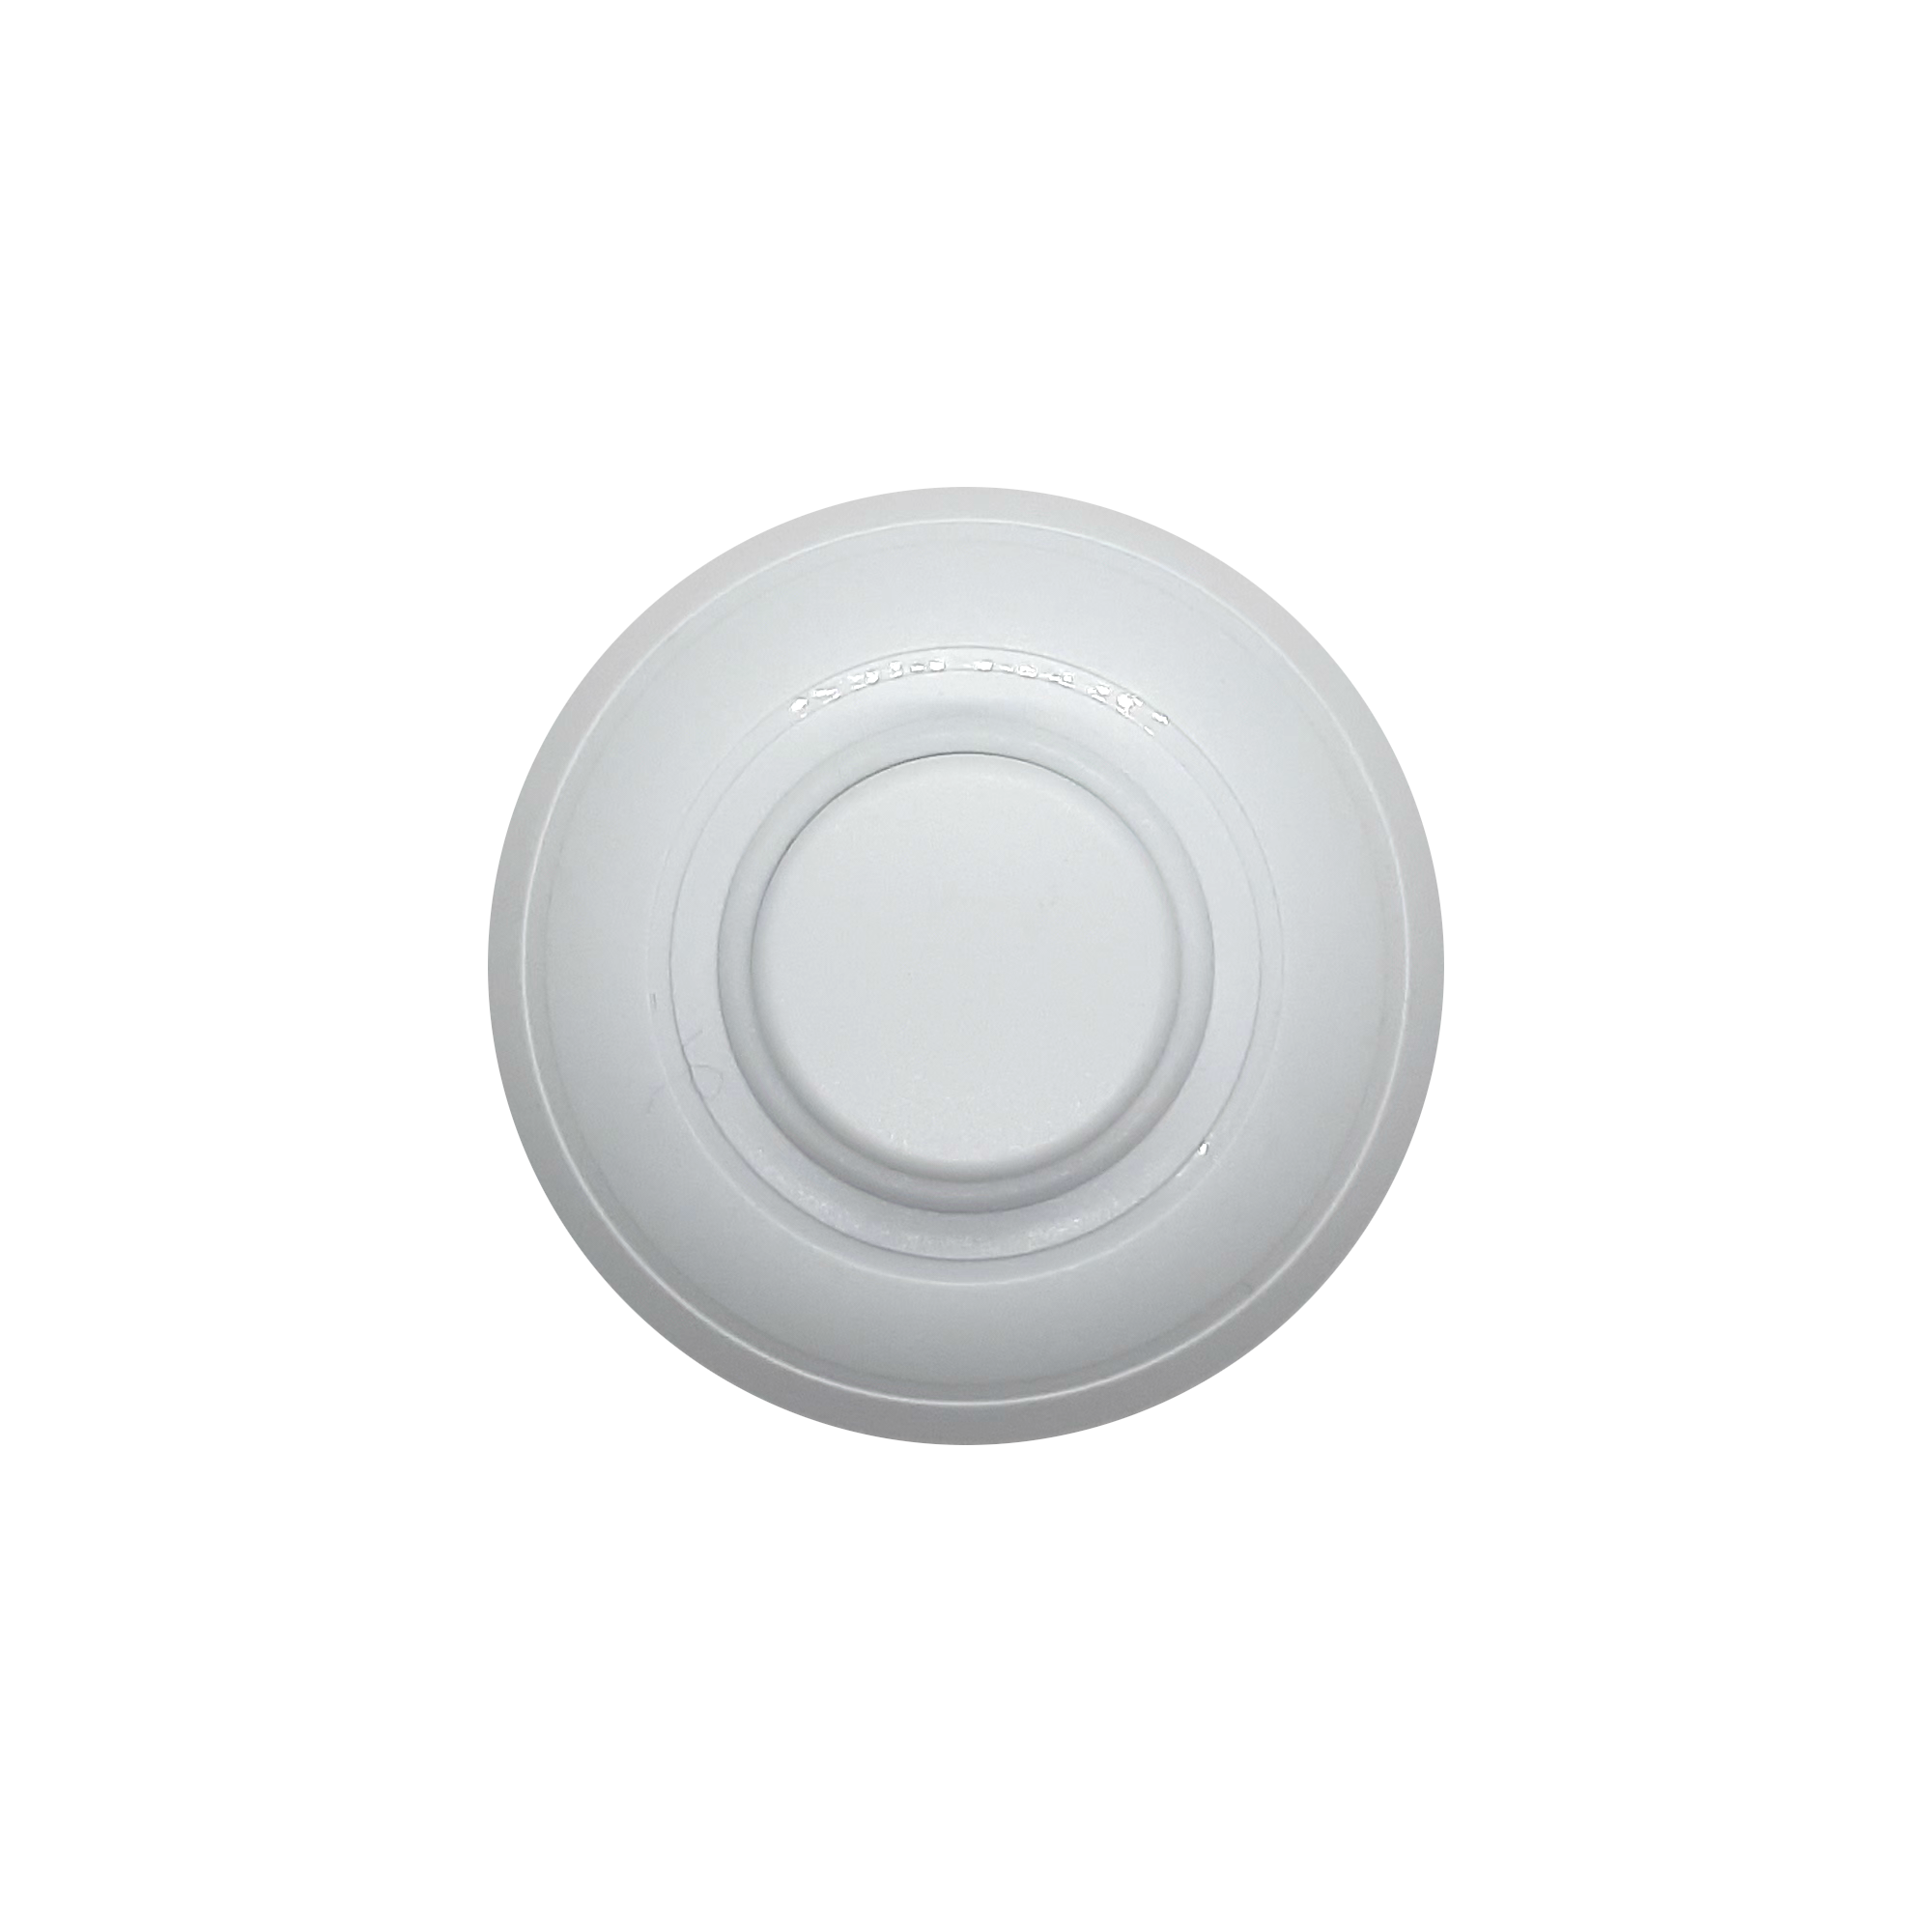 Product image of White Inline Floor Switch, top down view